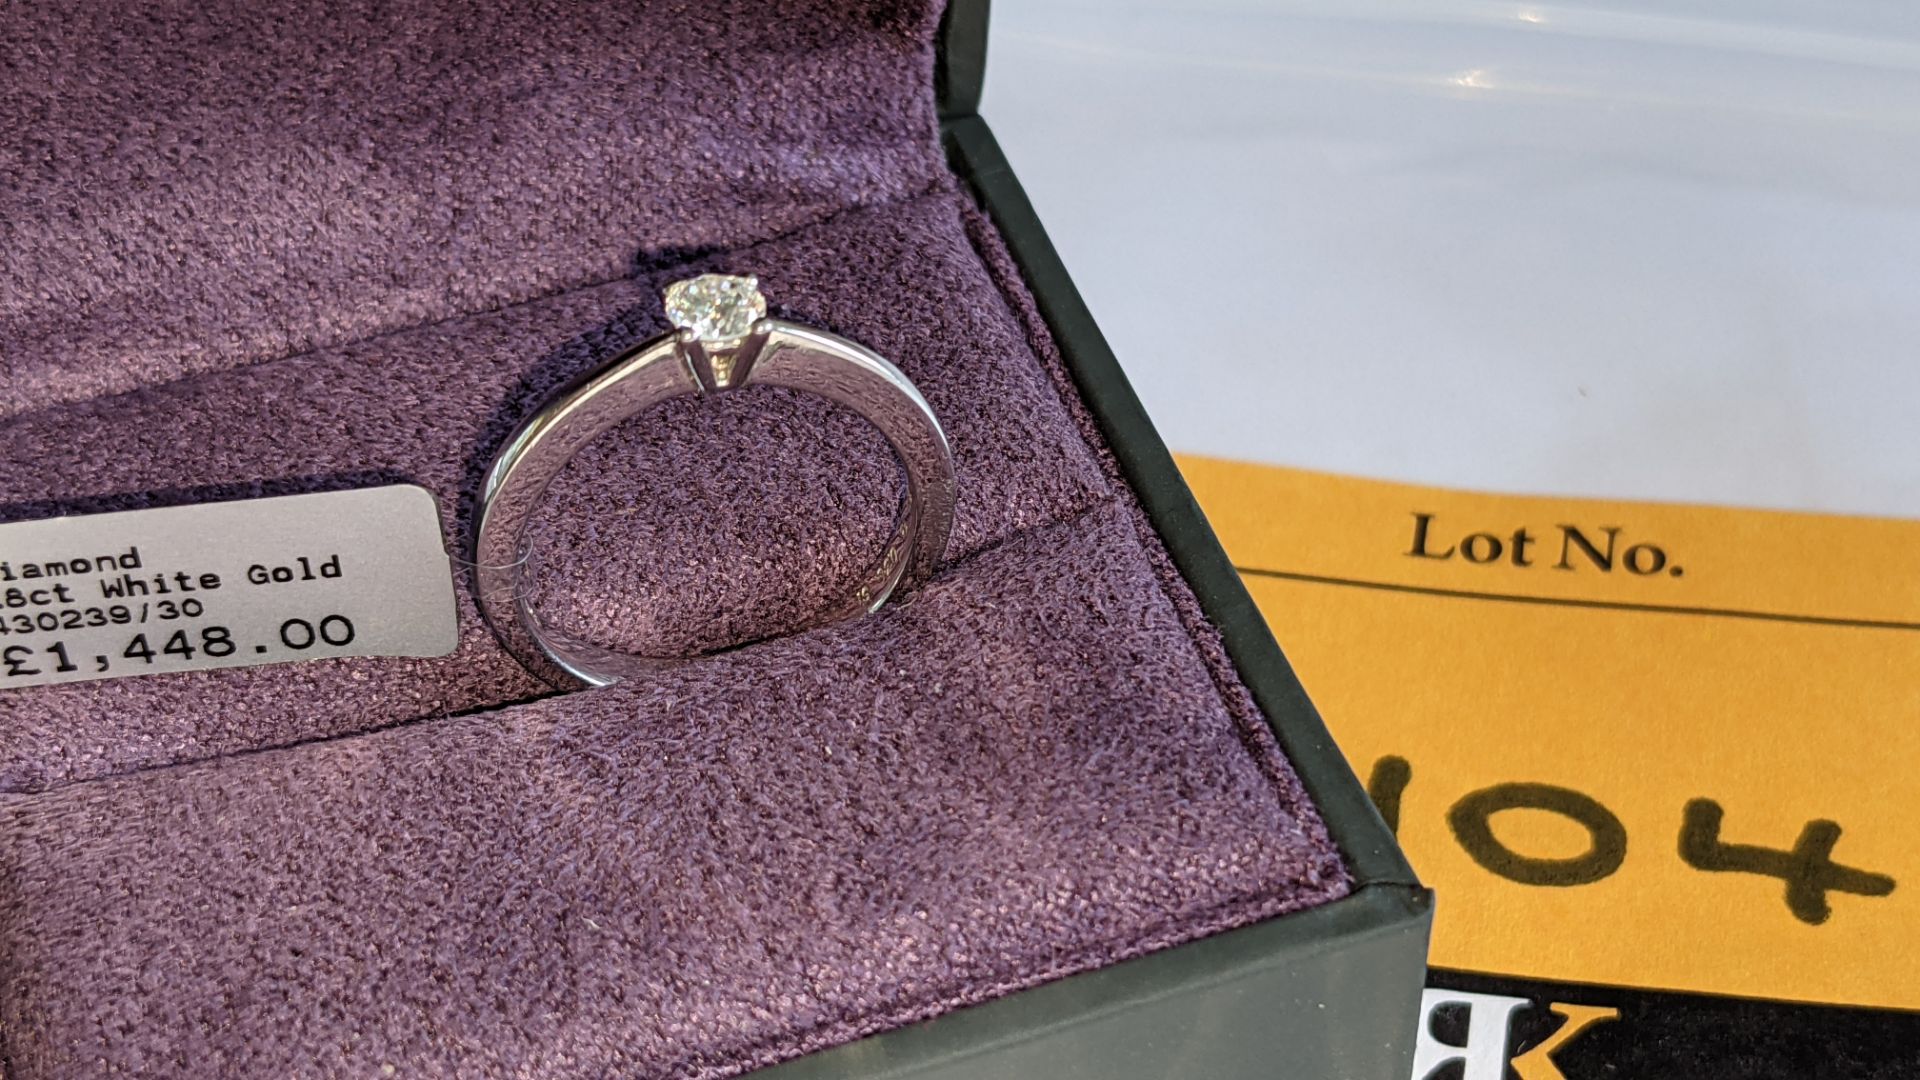 18ct white gold & diamond ring with 0.30ct H/Si stone RRP £1,448